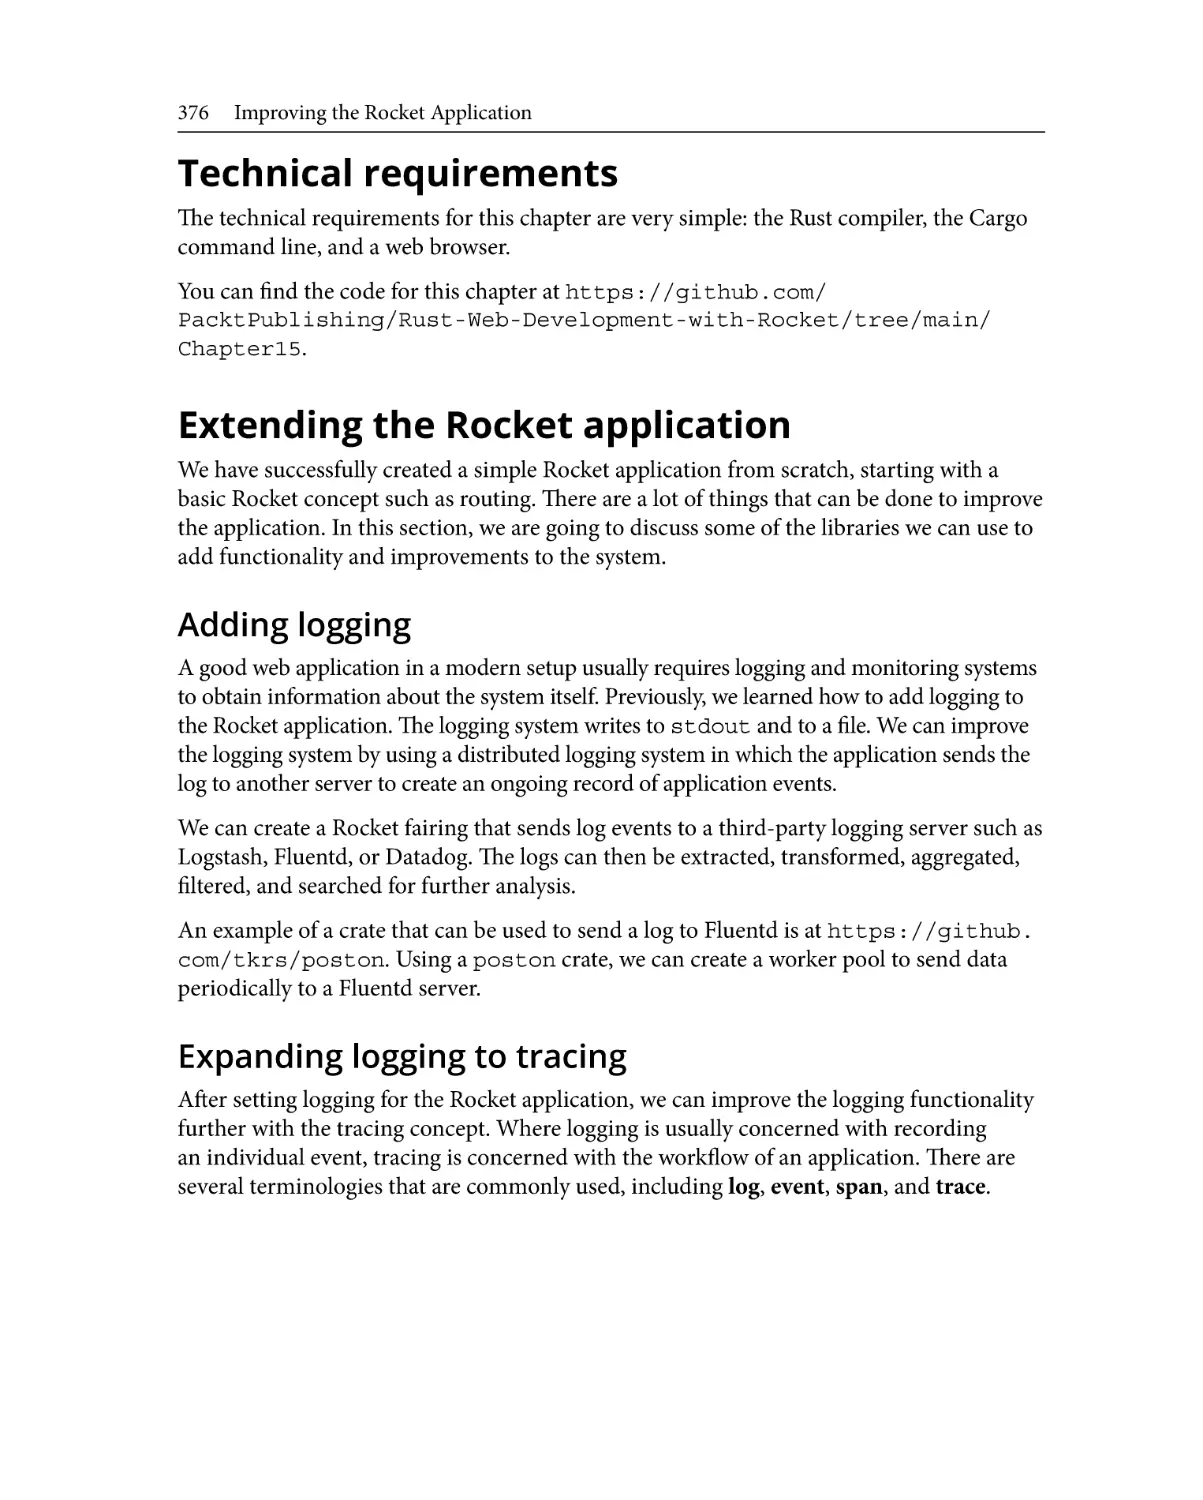 Technical requirements
Extending the Rocket application
Adding logging
Expanding logging to tracing